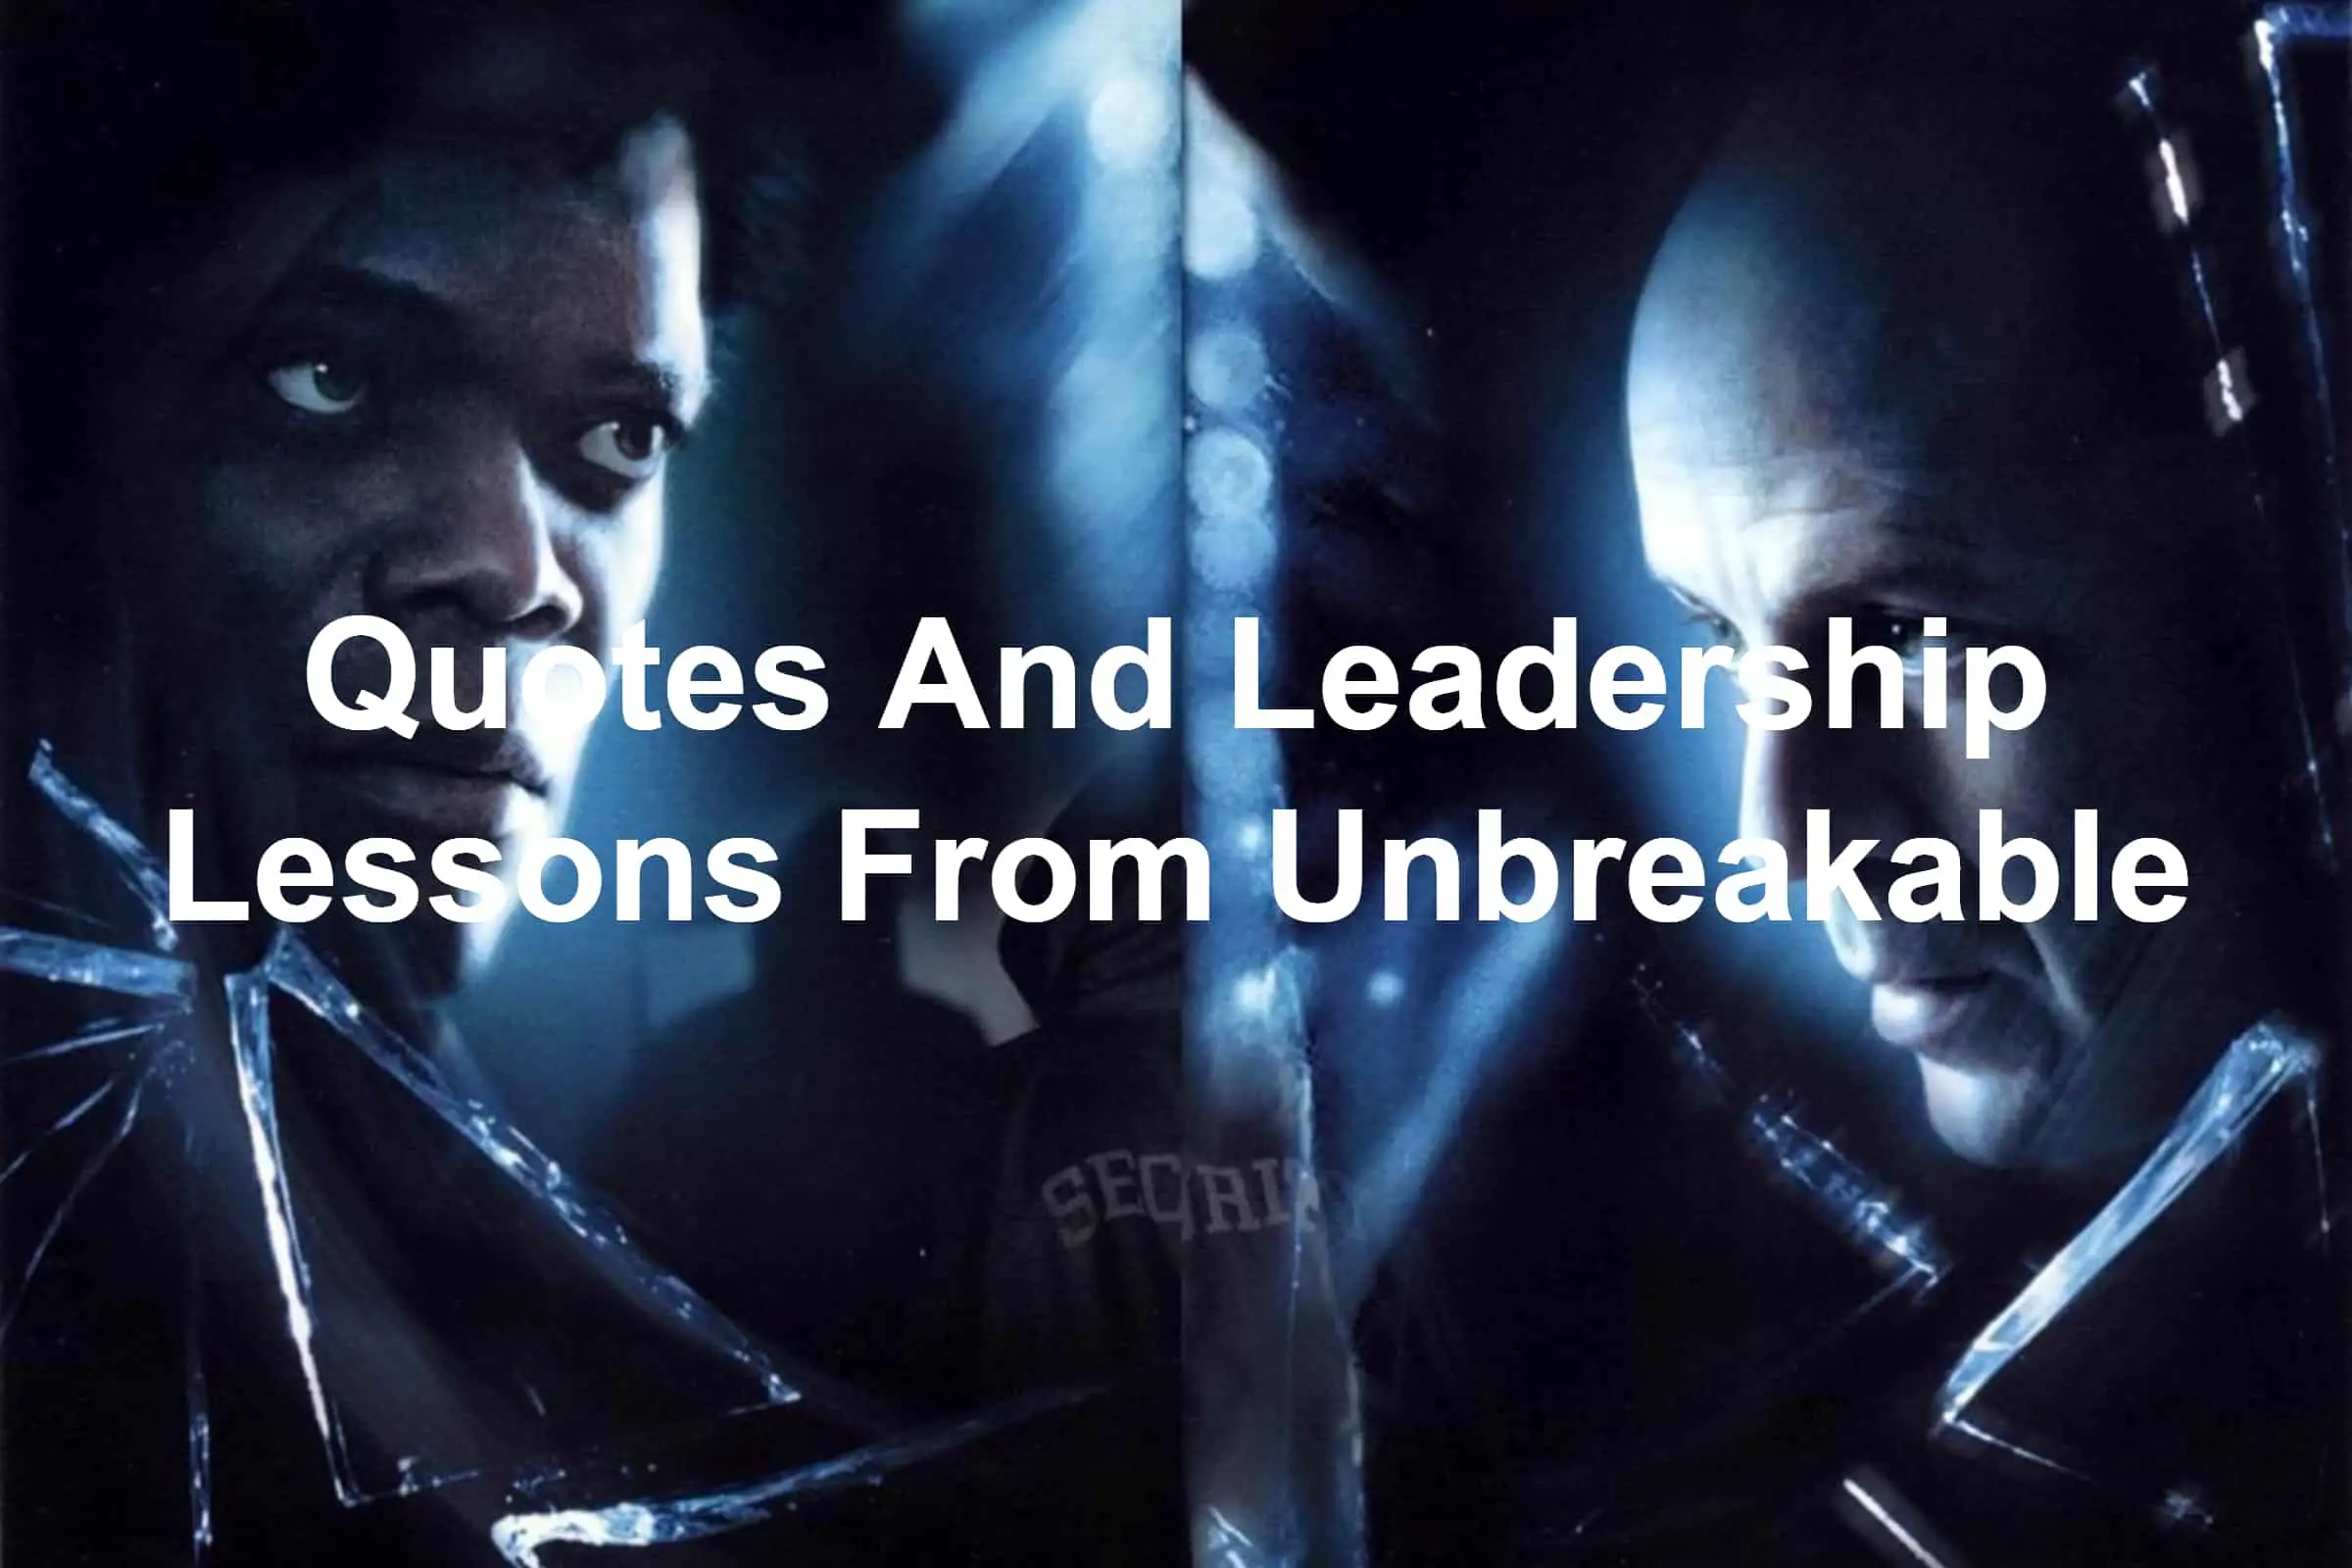 Quotes and leadership lessons from Unbreakable with Samuel L. Jackson and Bruce Willis